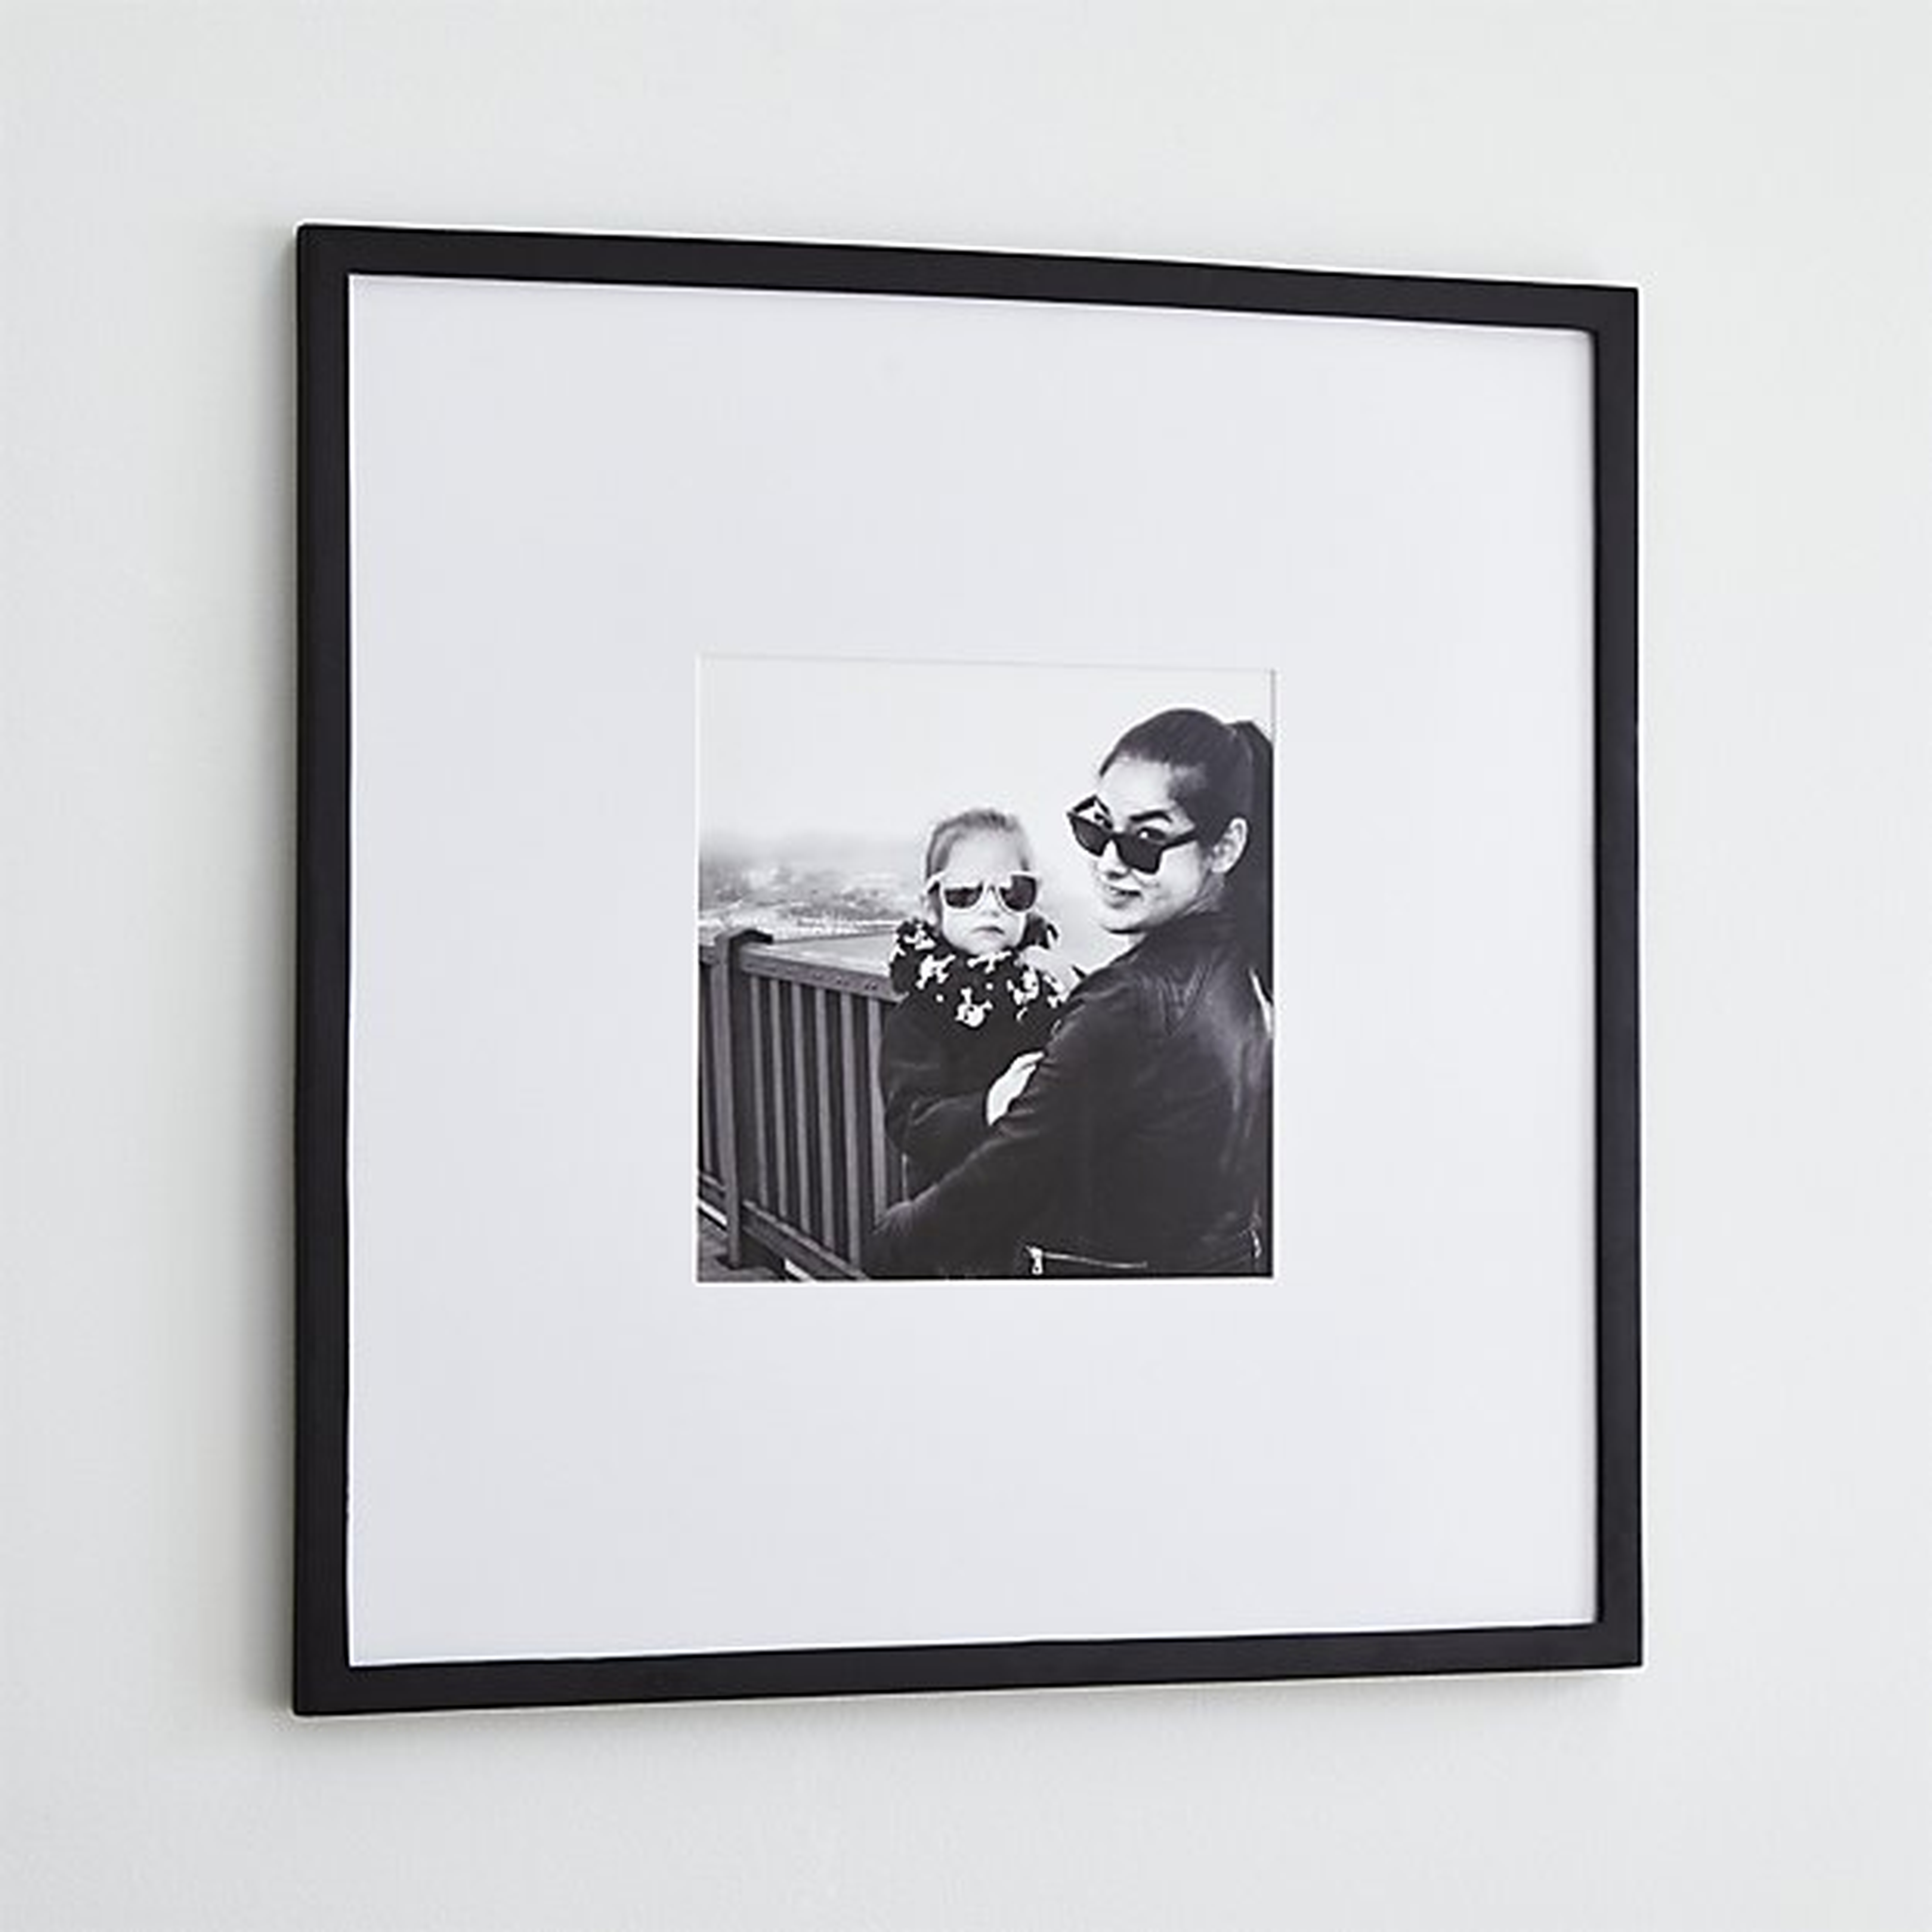 Matte Black 11x11 Wall Frame - Crate and Barrel